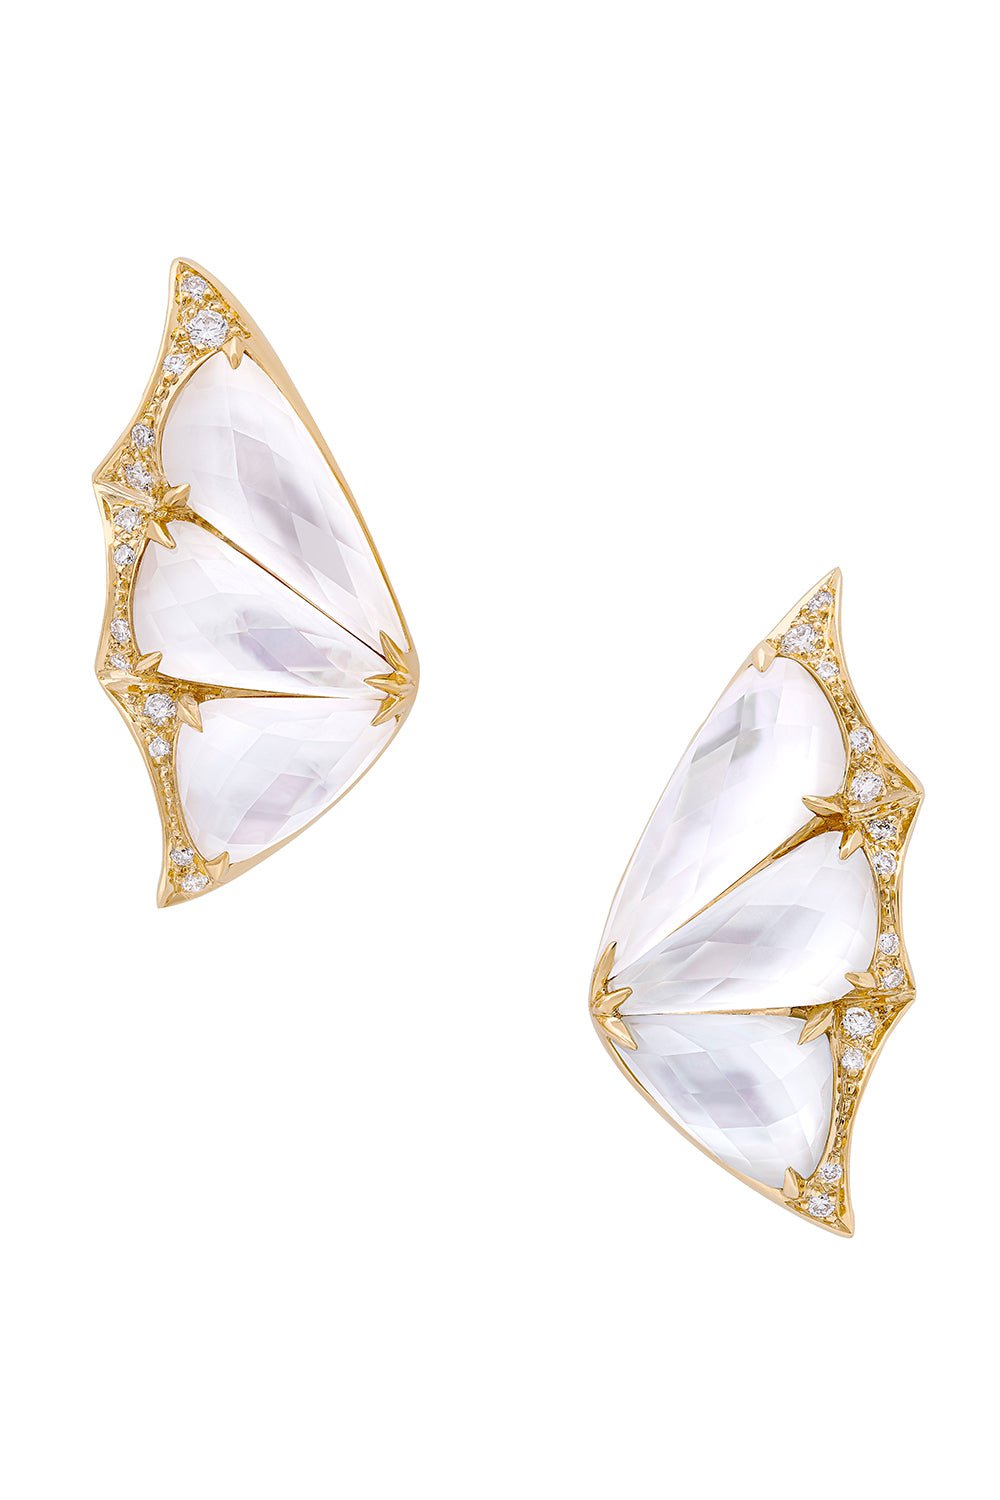 STEPHEN WEBSTER-Fly By Night Cuff Earrings-YELLOW GOLD